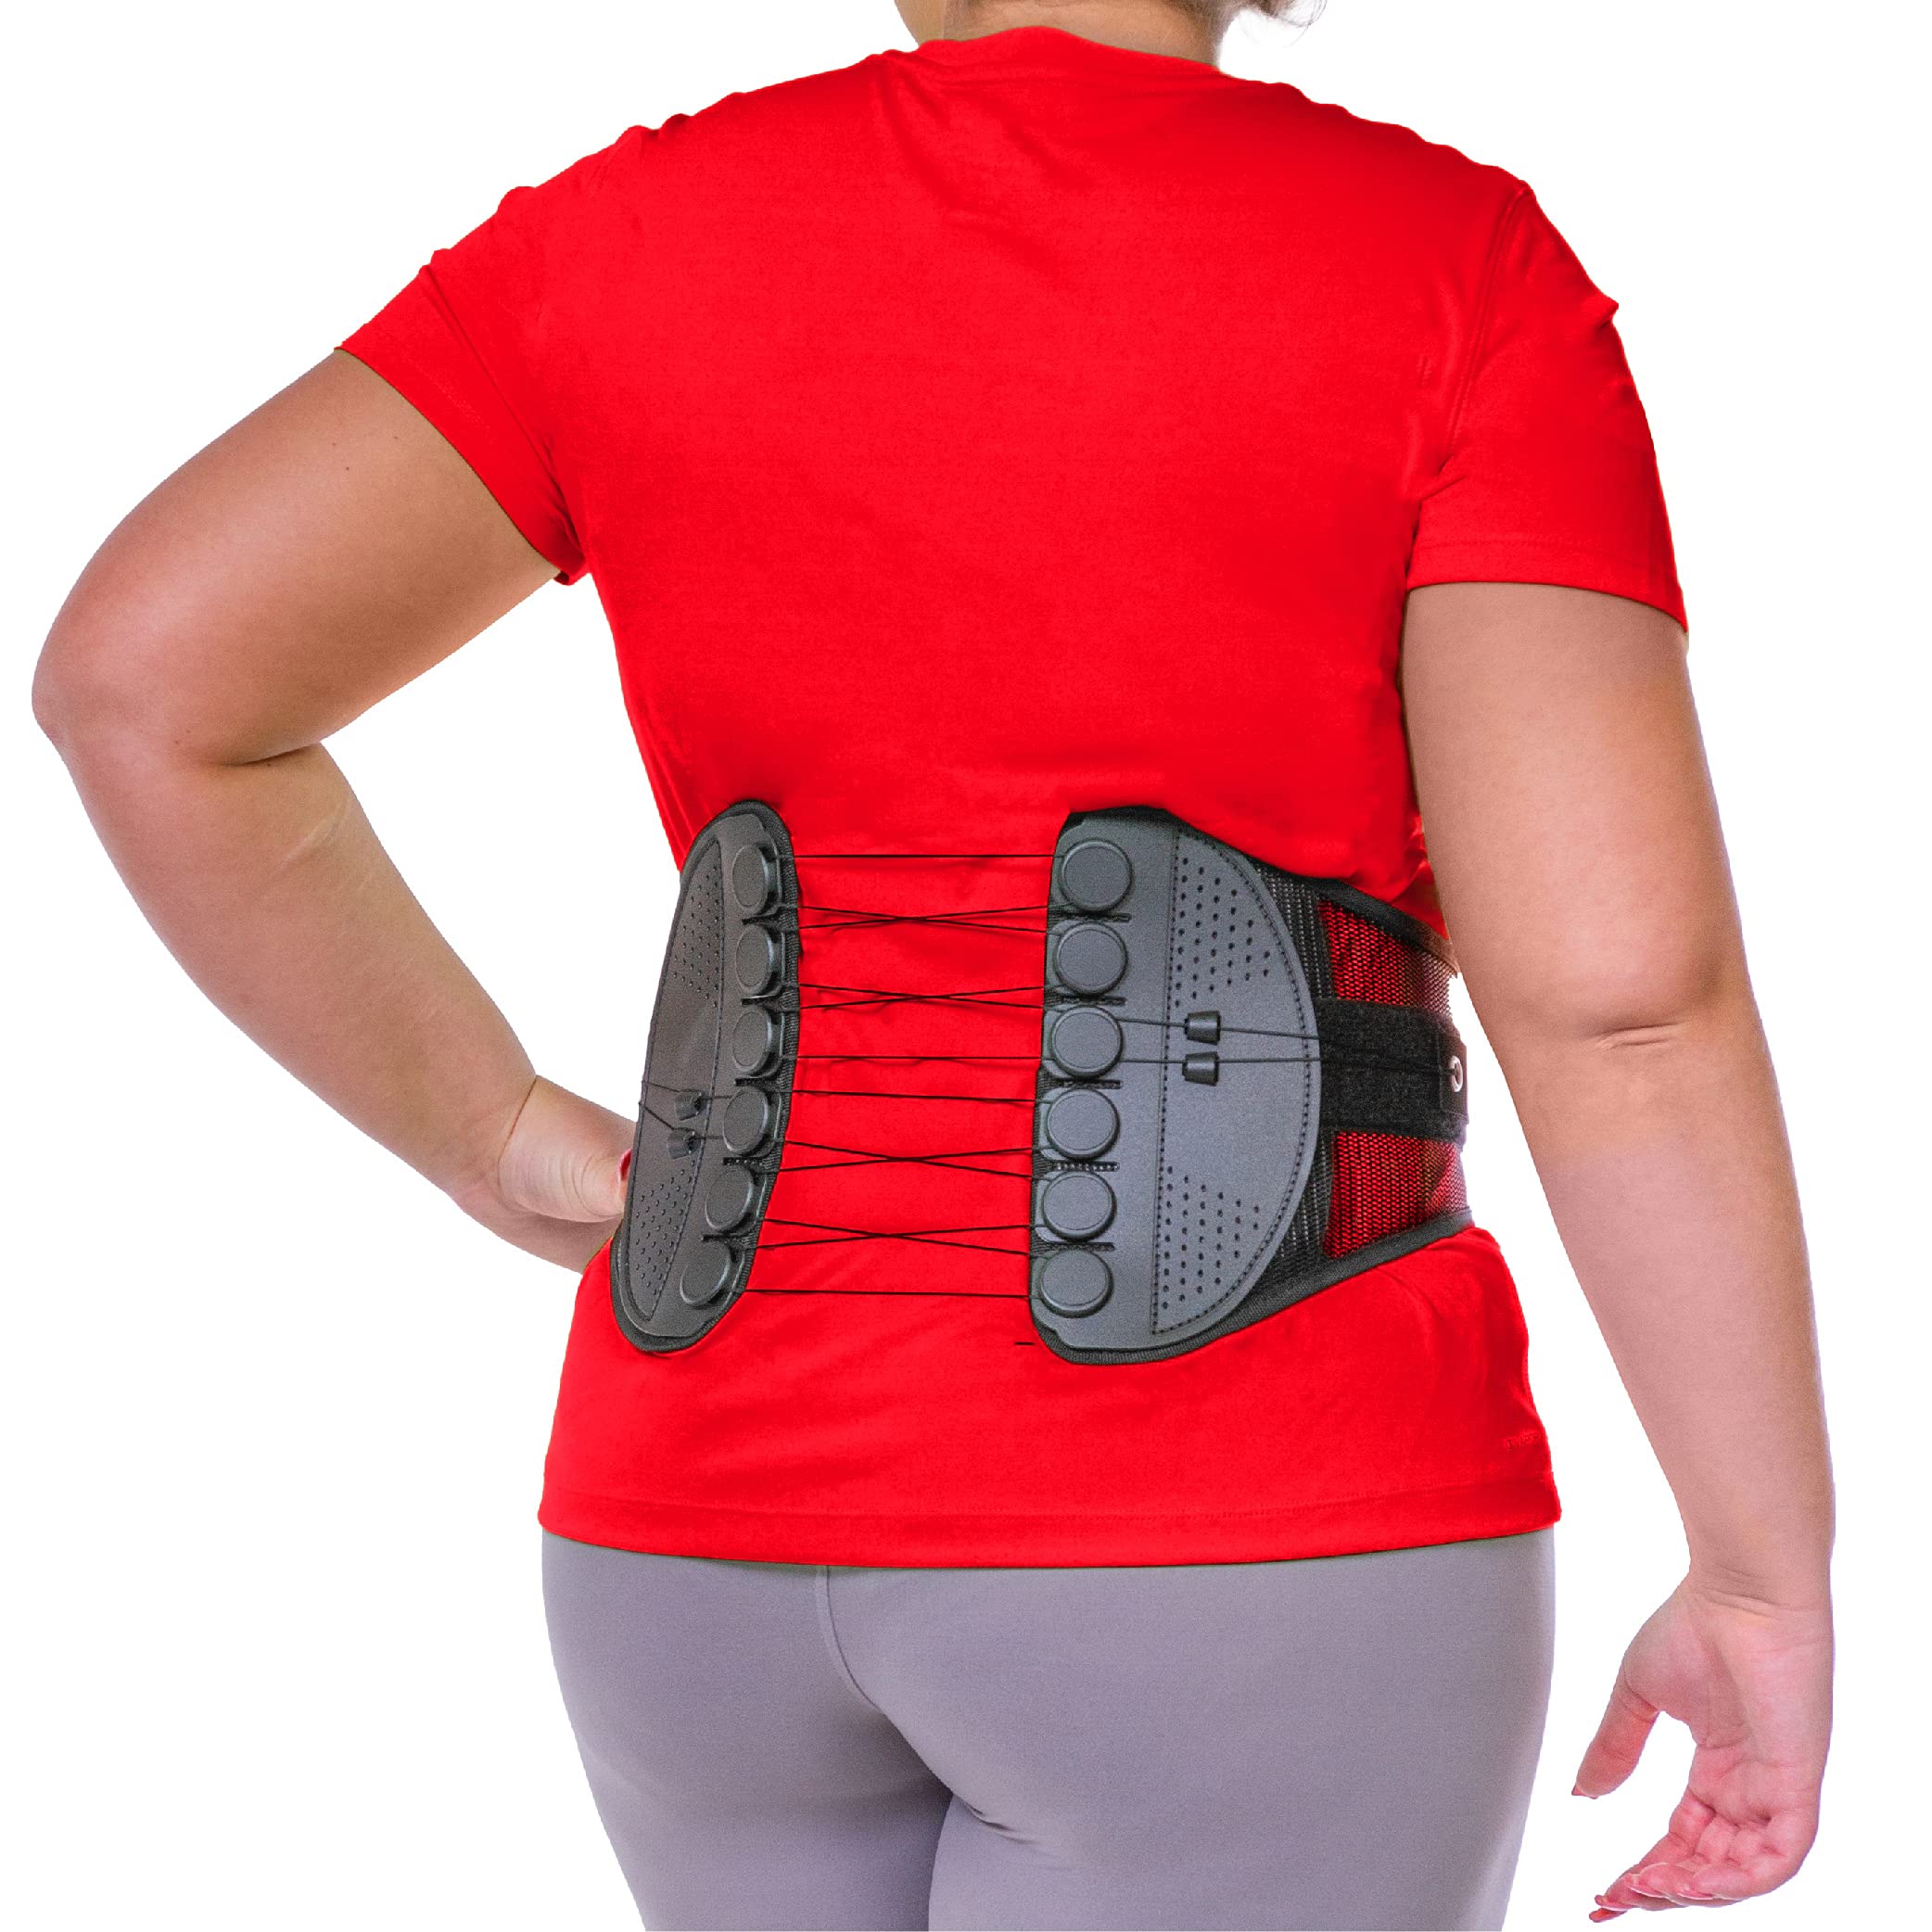 BraceAbility Spine Sport Lower Back Brace - Working Out, Exercise, Run, Kayak, Golf, Gym, Manual Labor, Tennis, Athletic Lumbar Corset for Active W...